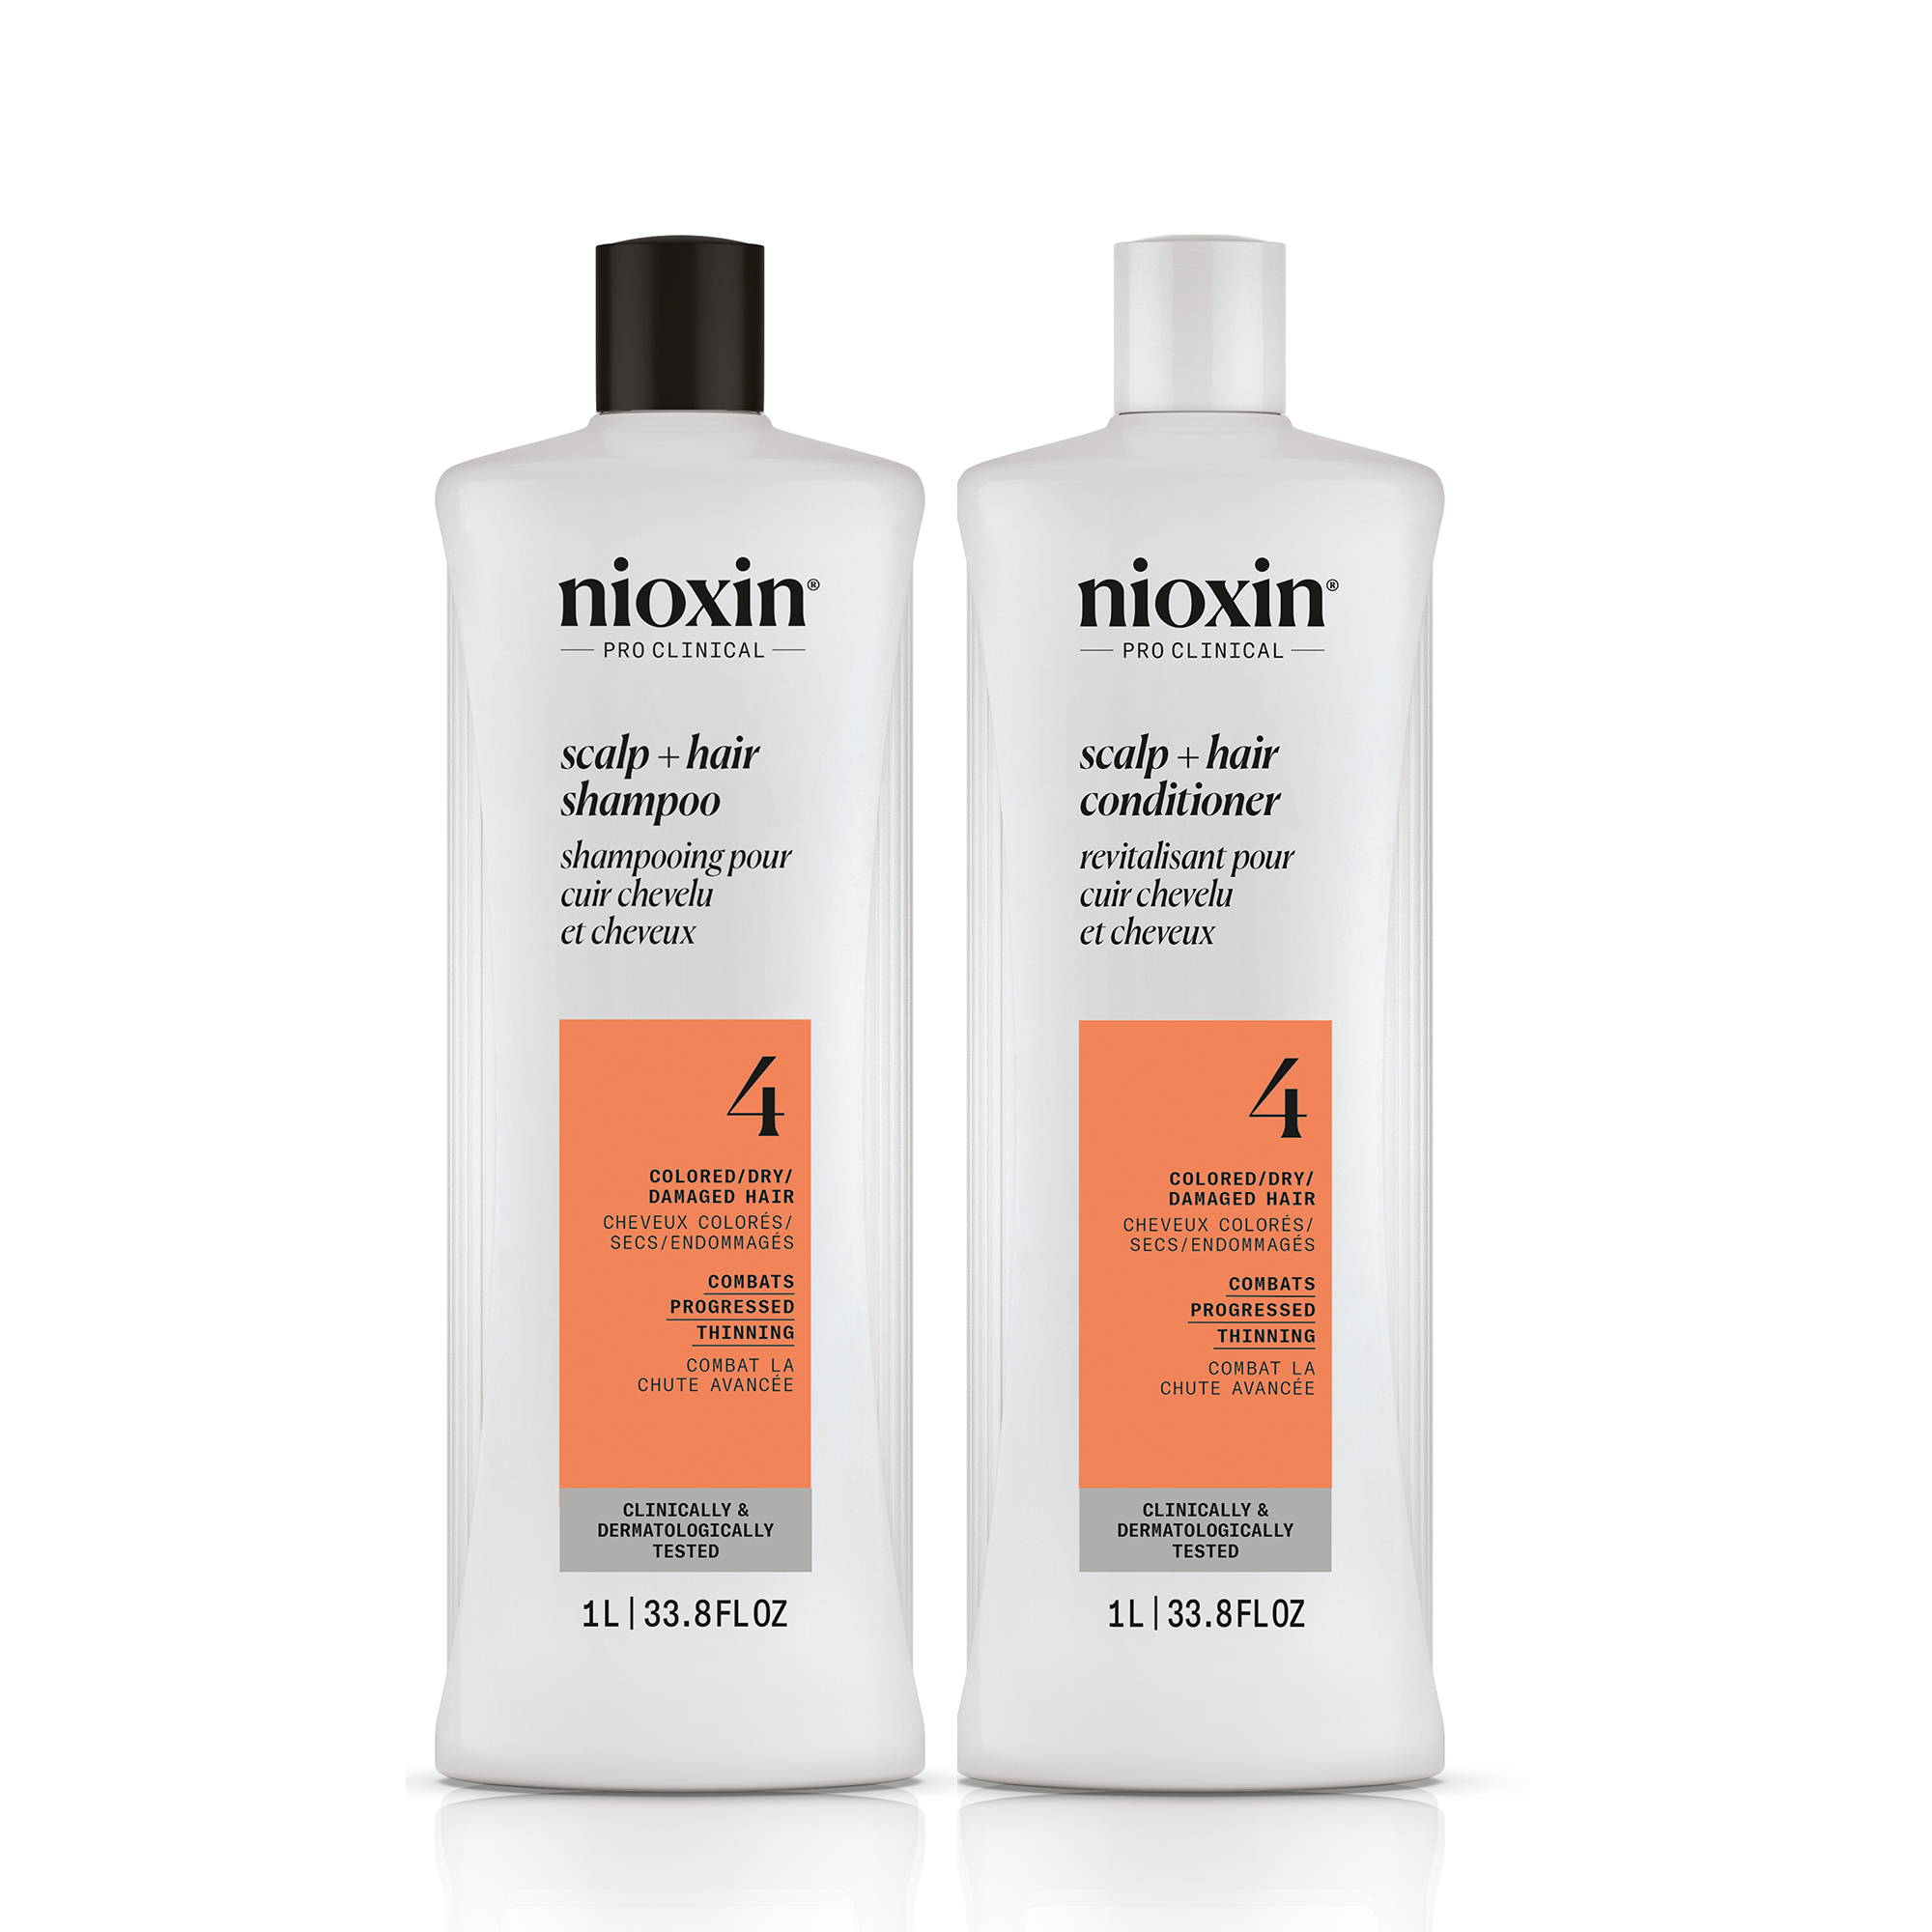 Nioxin System 4 Scalp + Hair Shampoo and Conditioner Liter Duo ($104 Value) / 33.8OZ